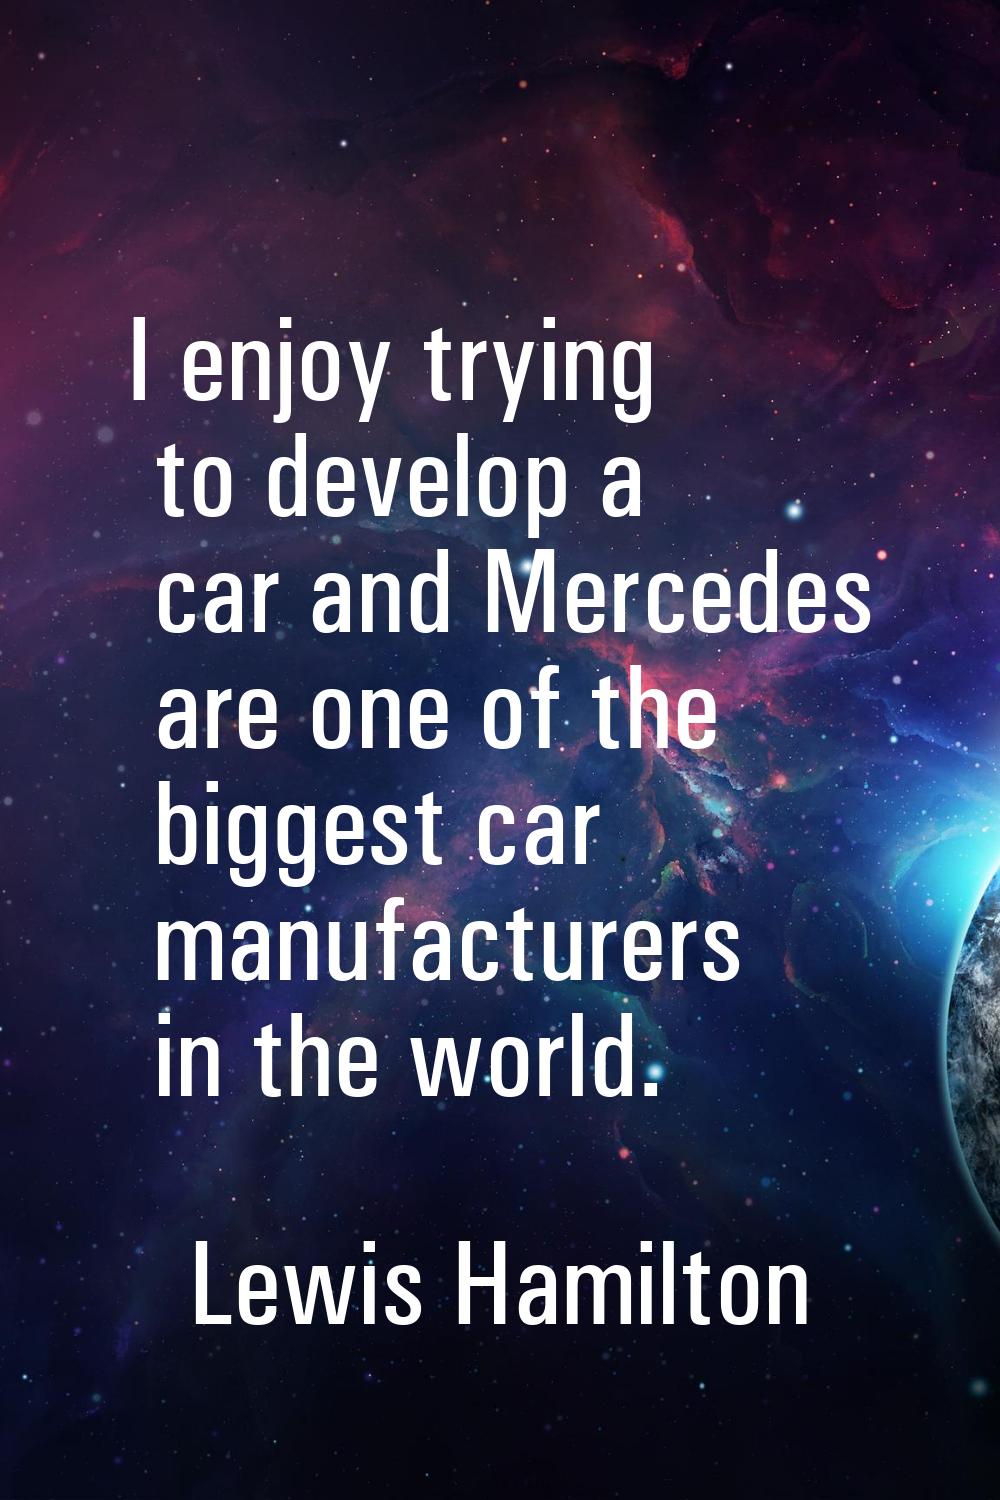 I enjoy trying to develop a car and Mercedes are one of the biggest car manufacturers in the world.